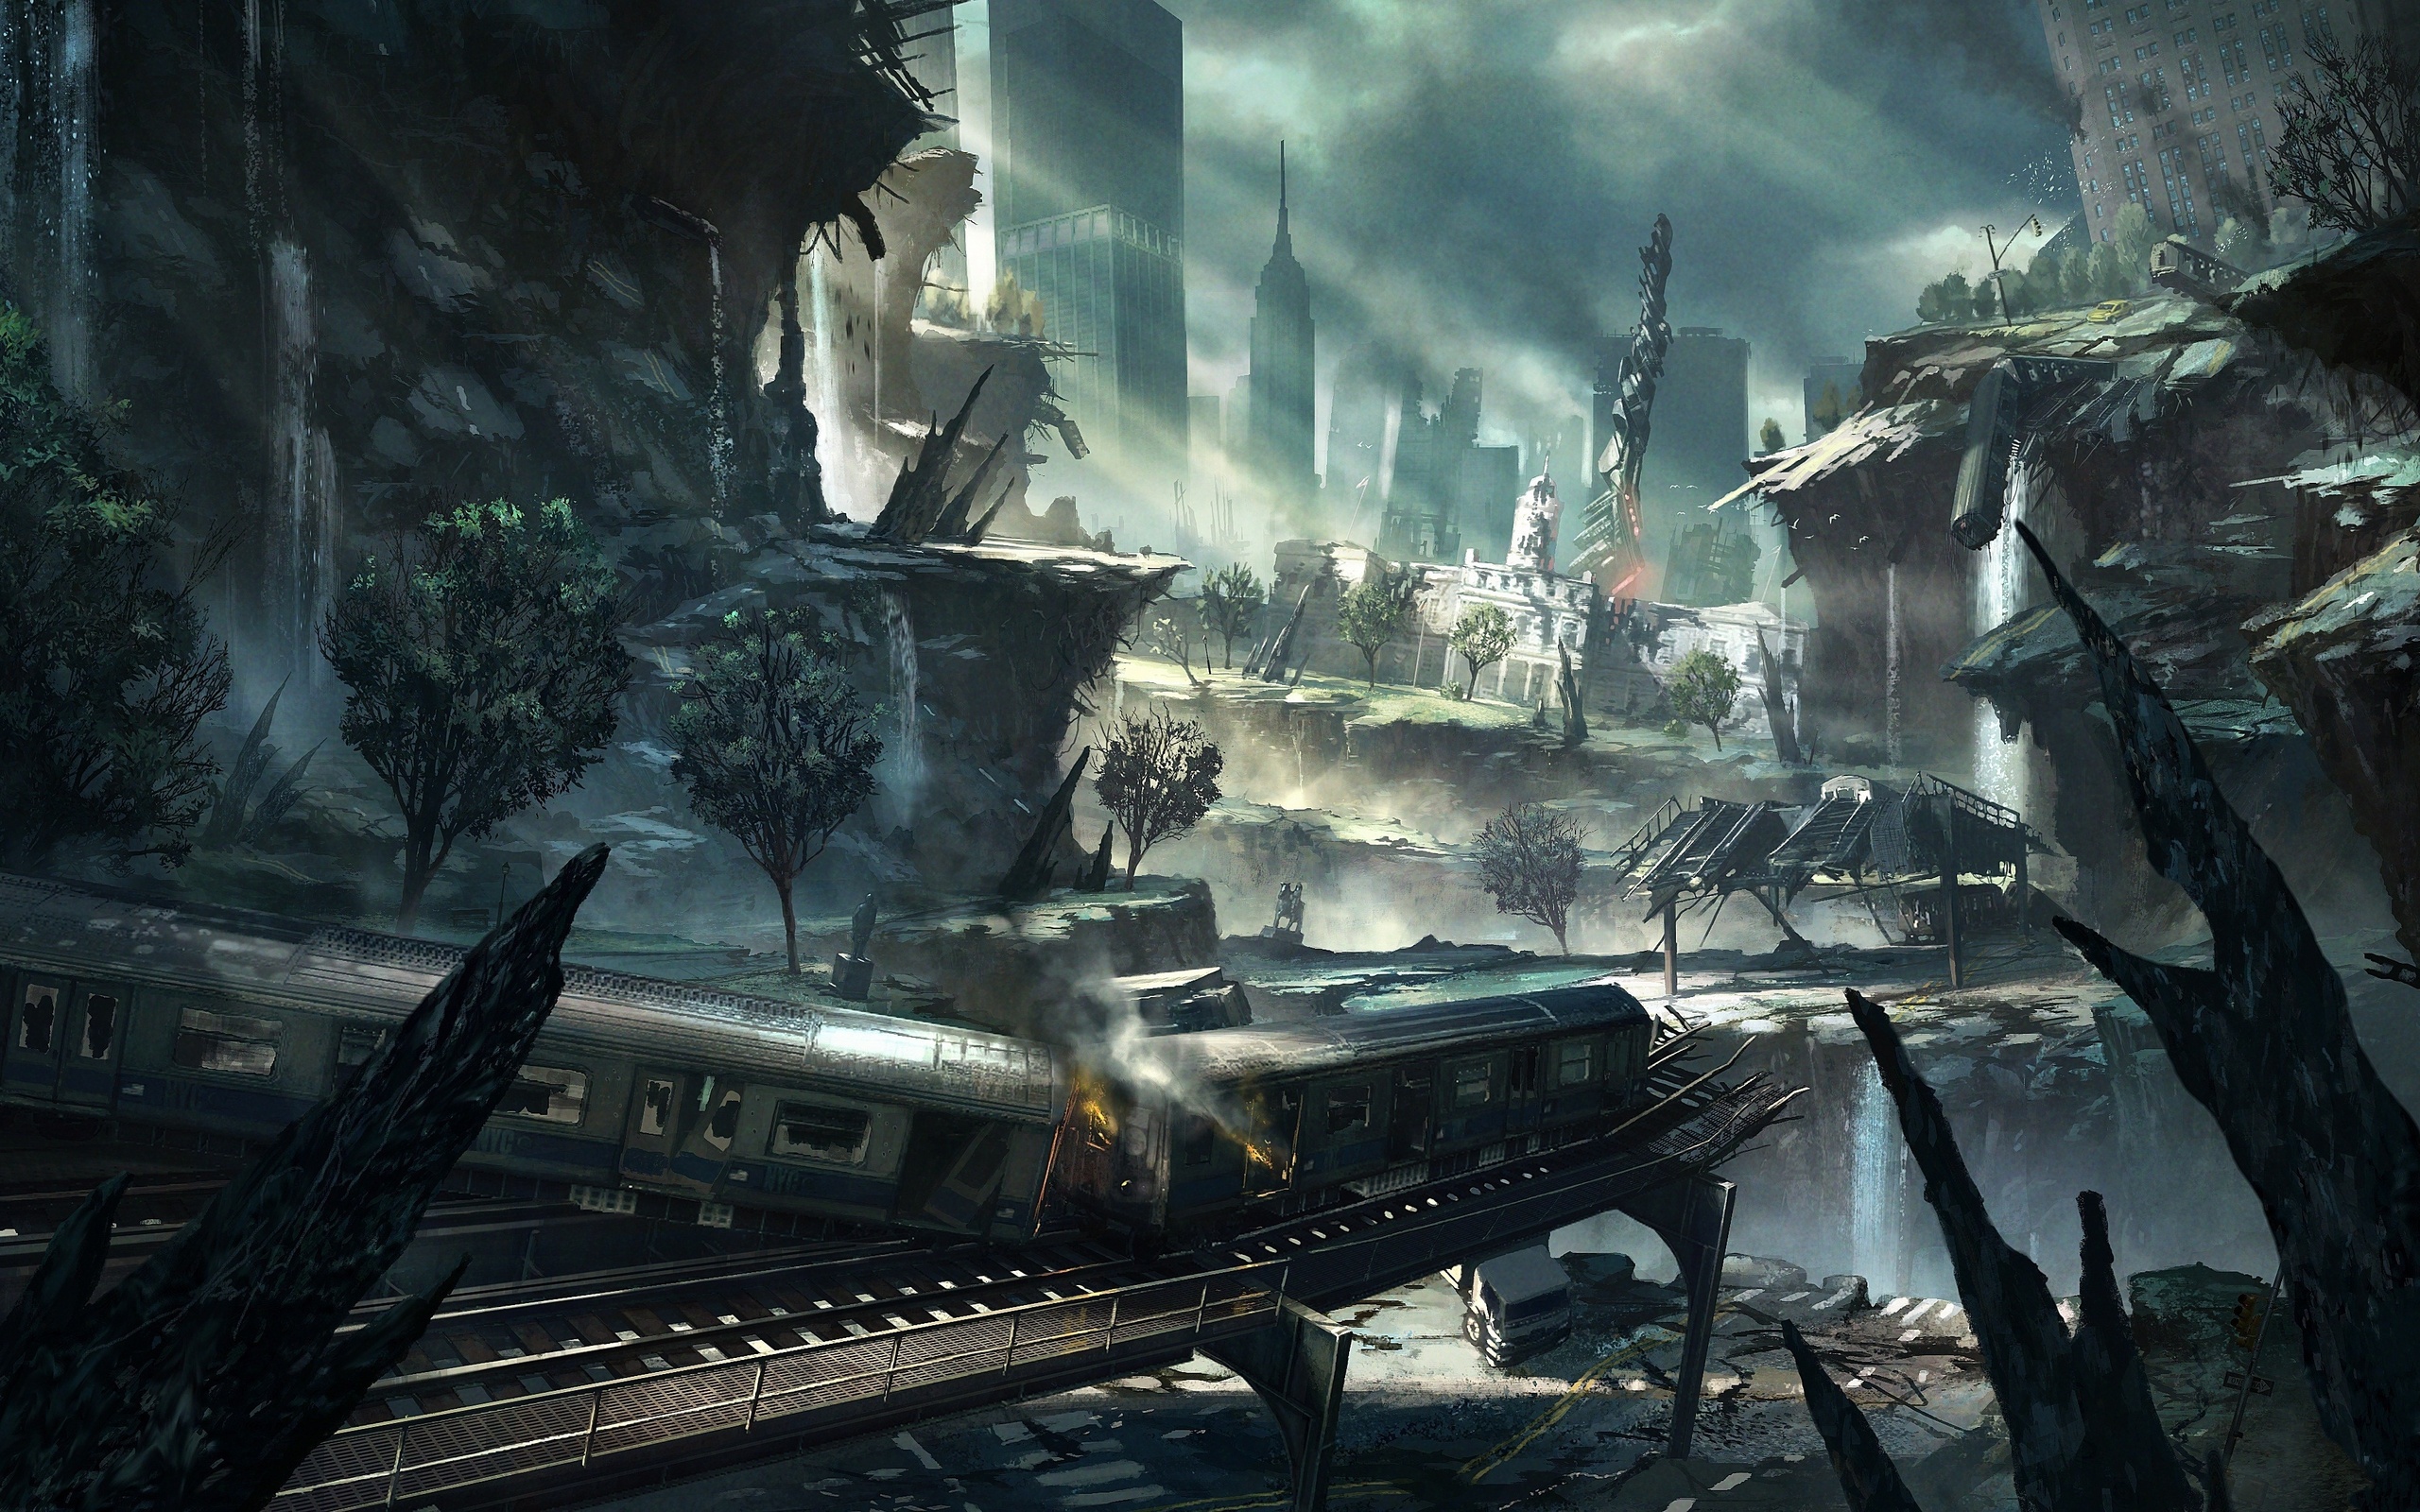 General 2560x1600 video games Crysis Crysis 2 science fiction video game art wreck ruins